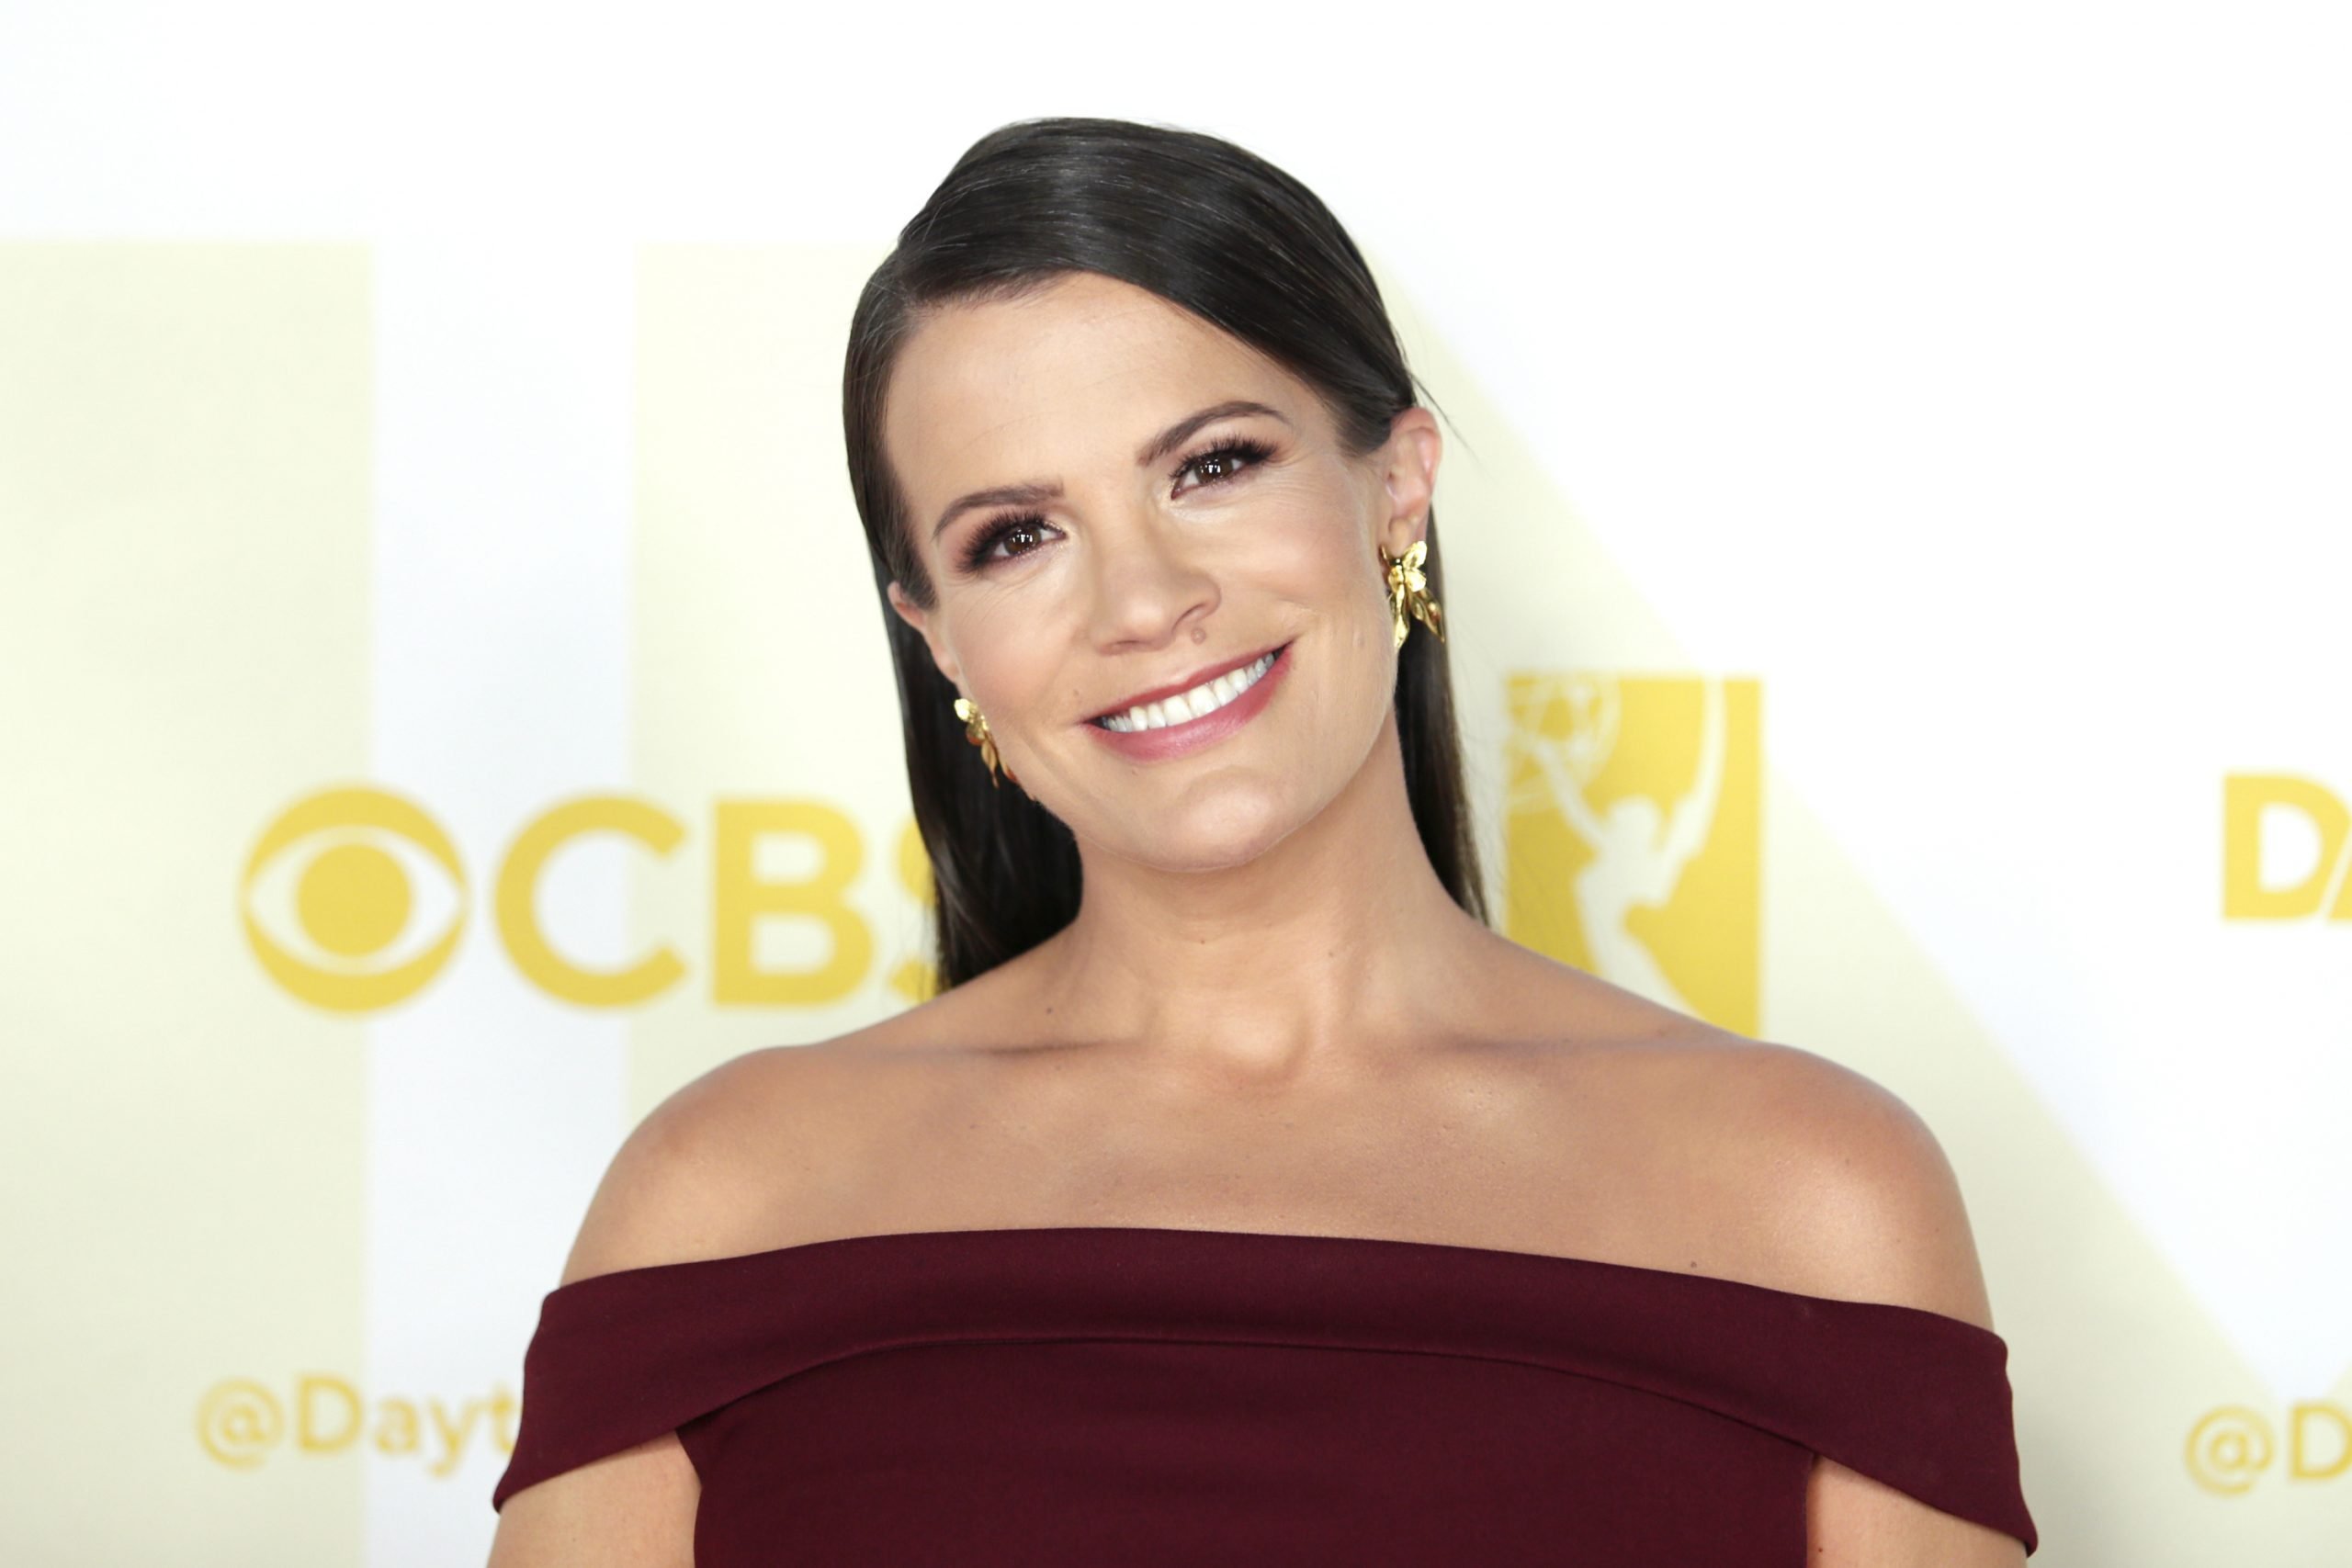 'The Young and the Restless' star Melissa Claire Egan reassures fans she and her character Chelsea Lawson aren't leaving.